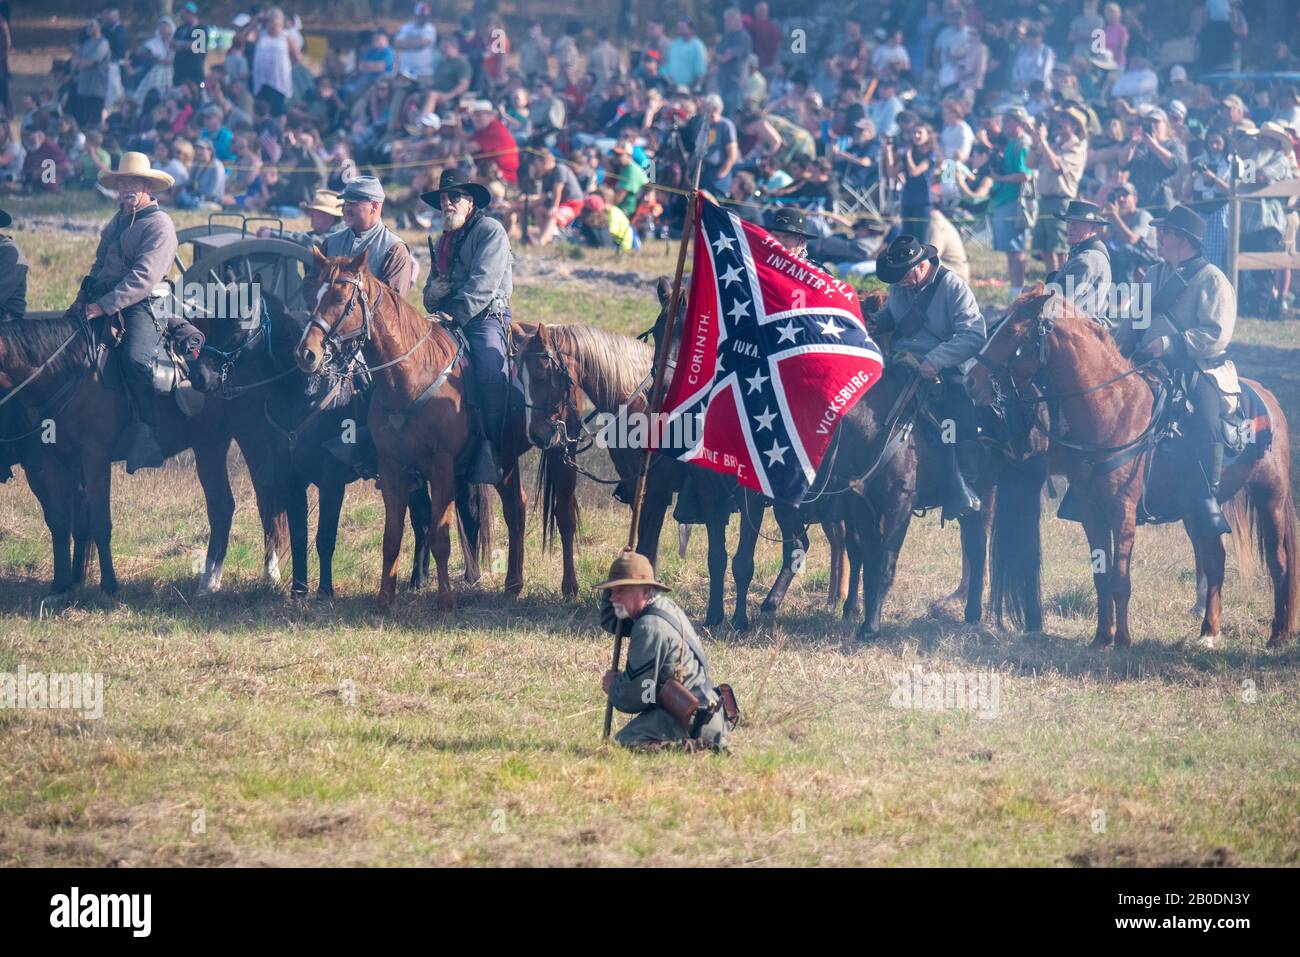 Brooksville, FL - January 18, 2020: Confederate cavalry gathers in front of a large crowd at a civil war reenactment in Brooksville, Florida. Stock Photo